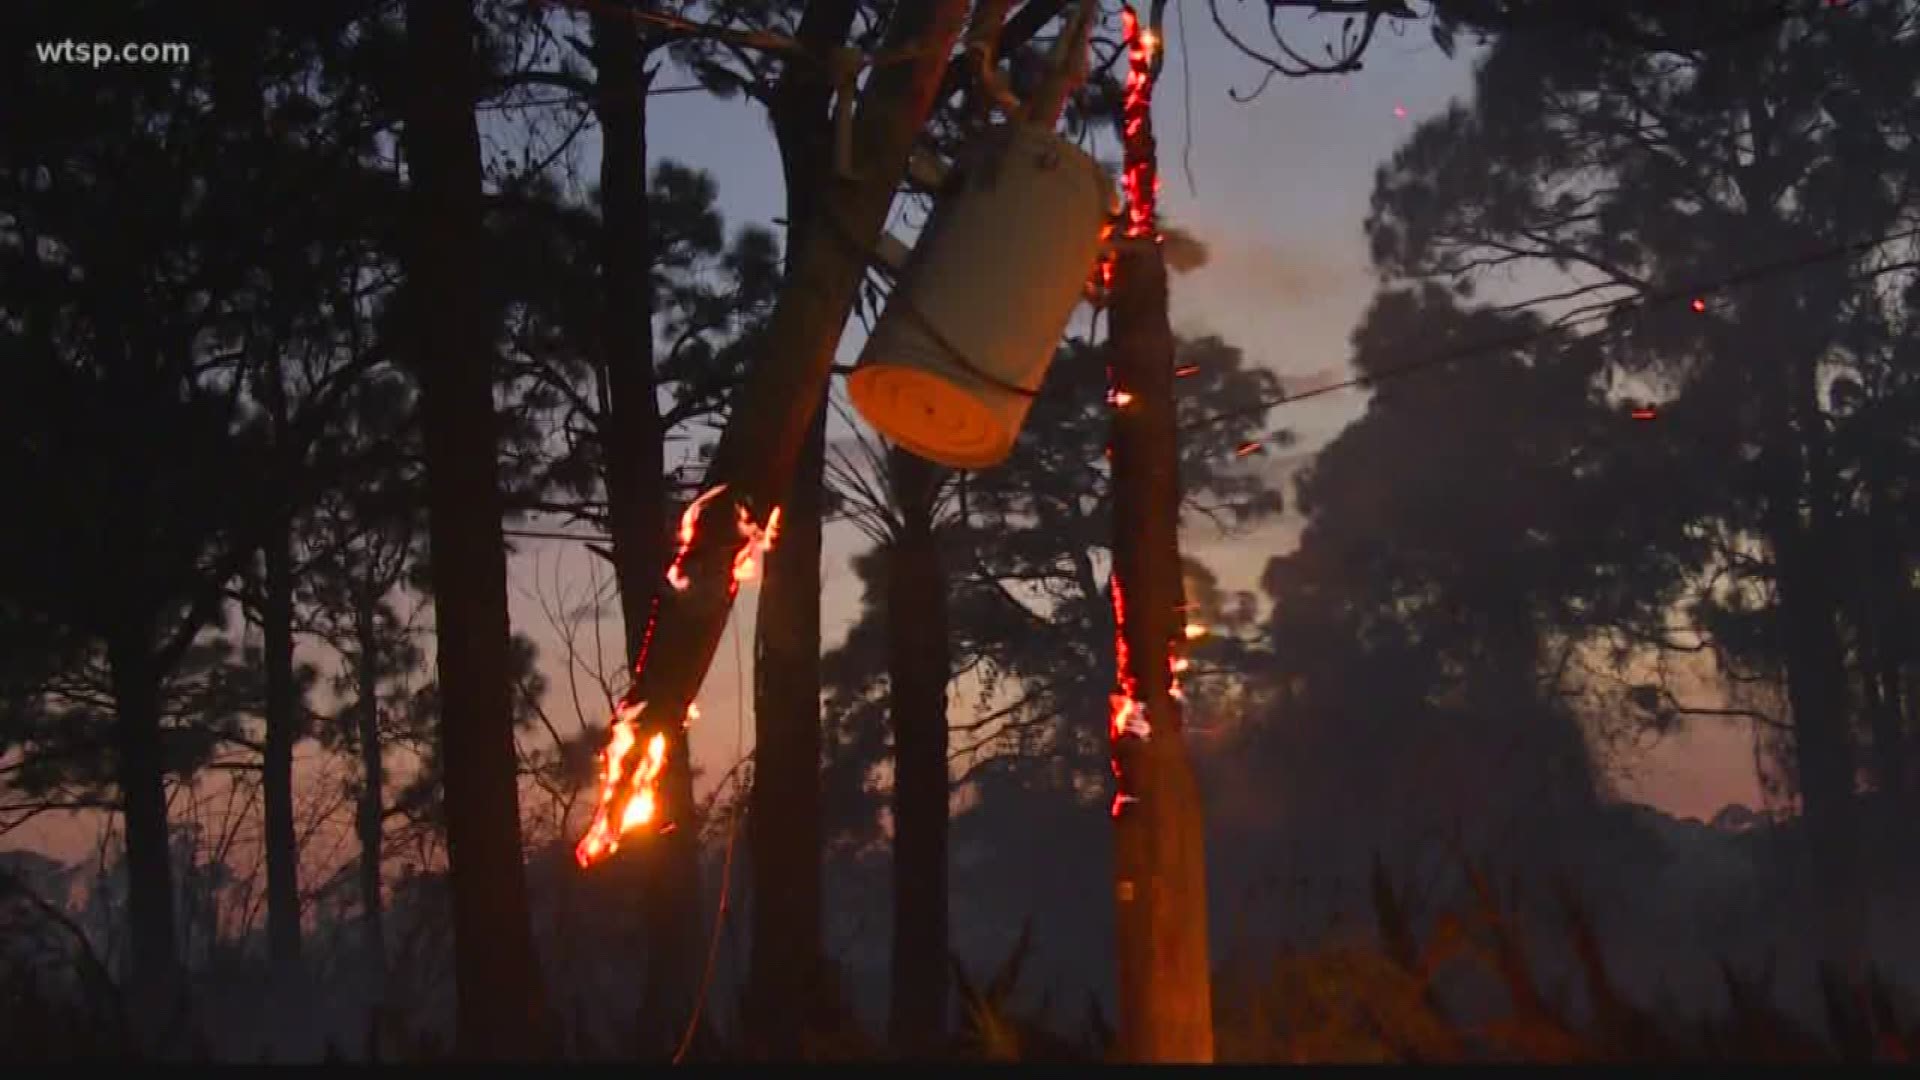 The fire burned more than 200 acres between Sarasota and Fort Myers in the Sands of Placida neighborhood.